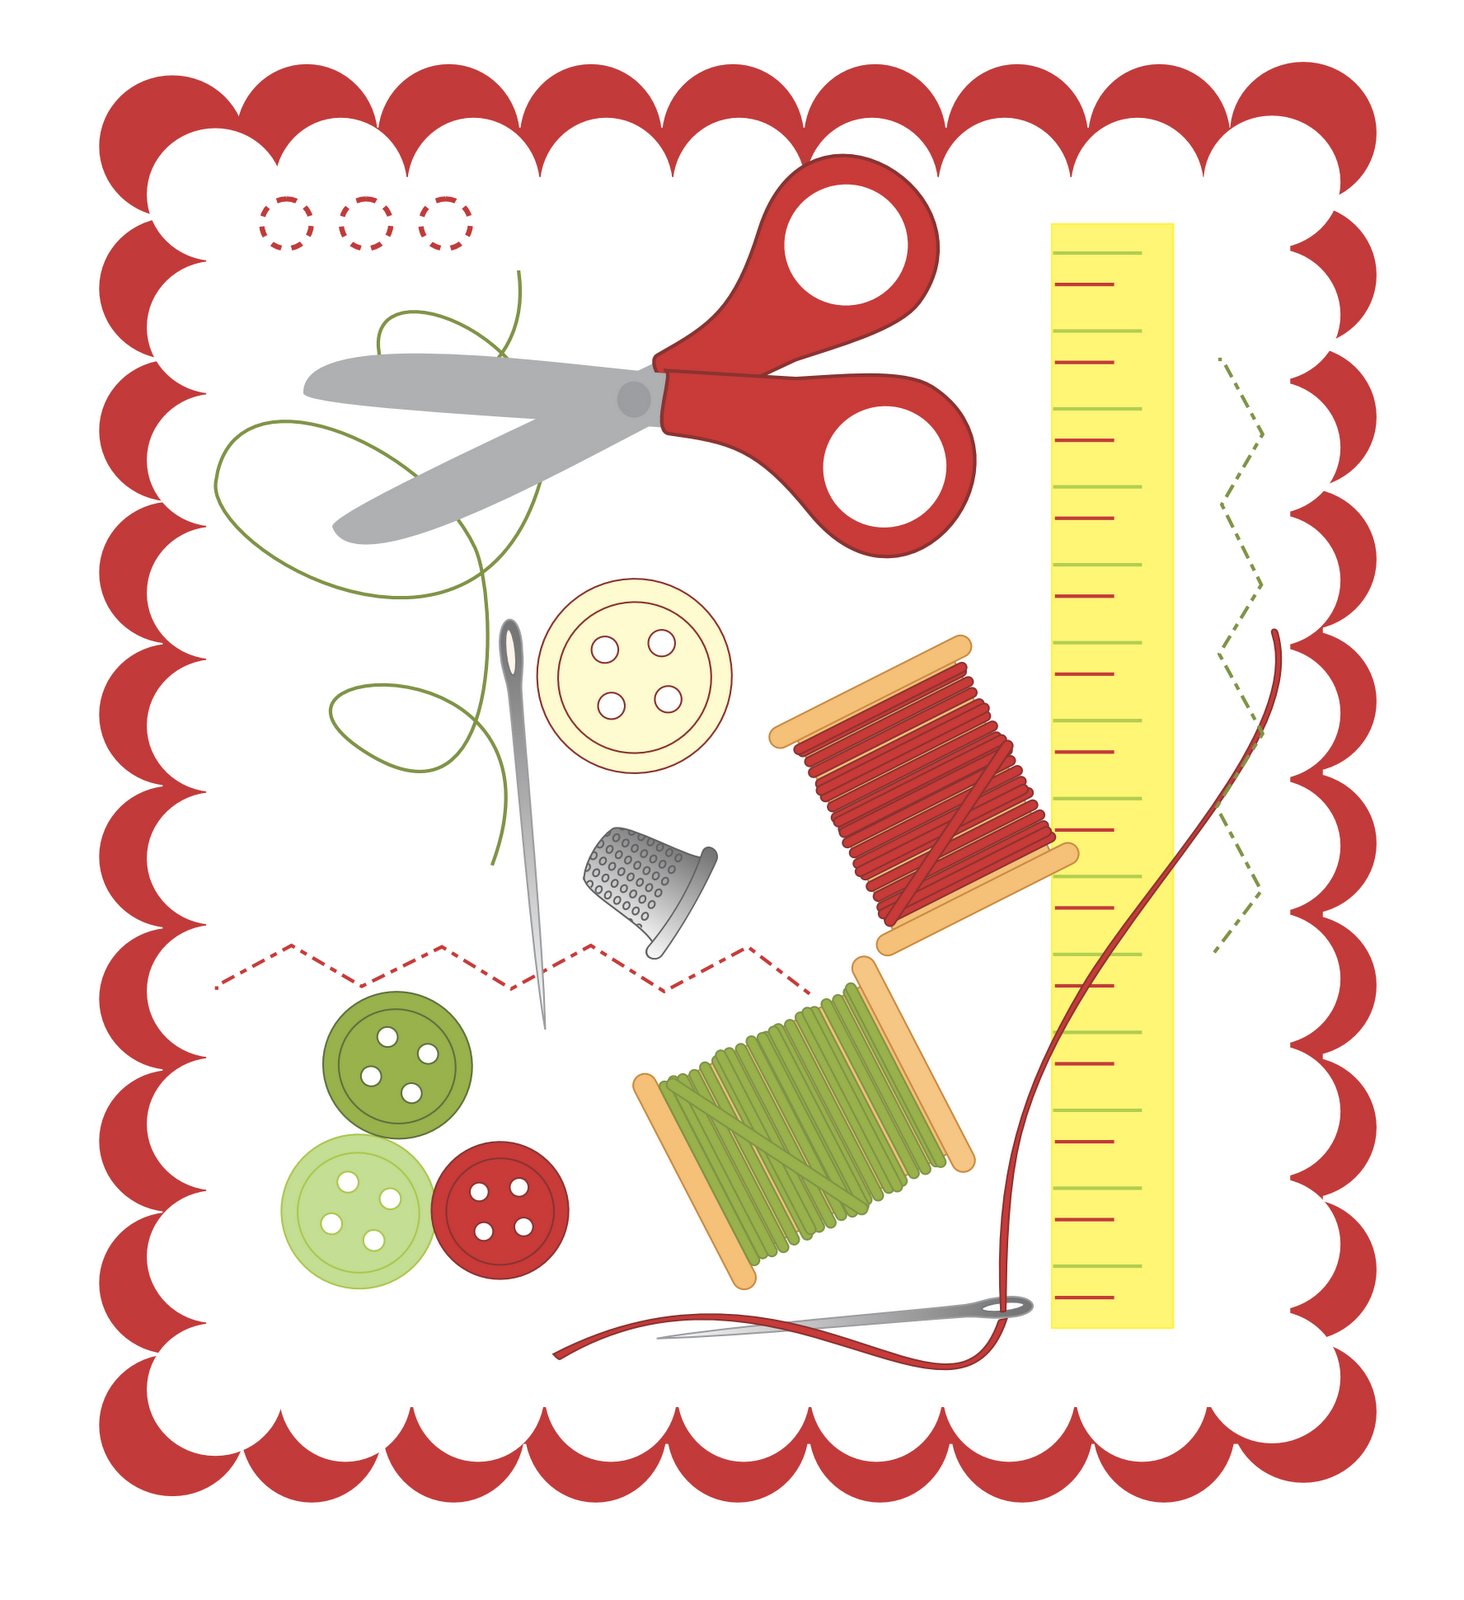 Clipart sewing images